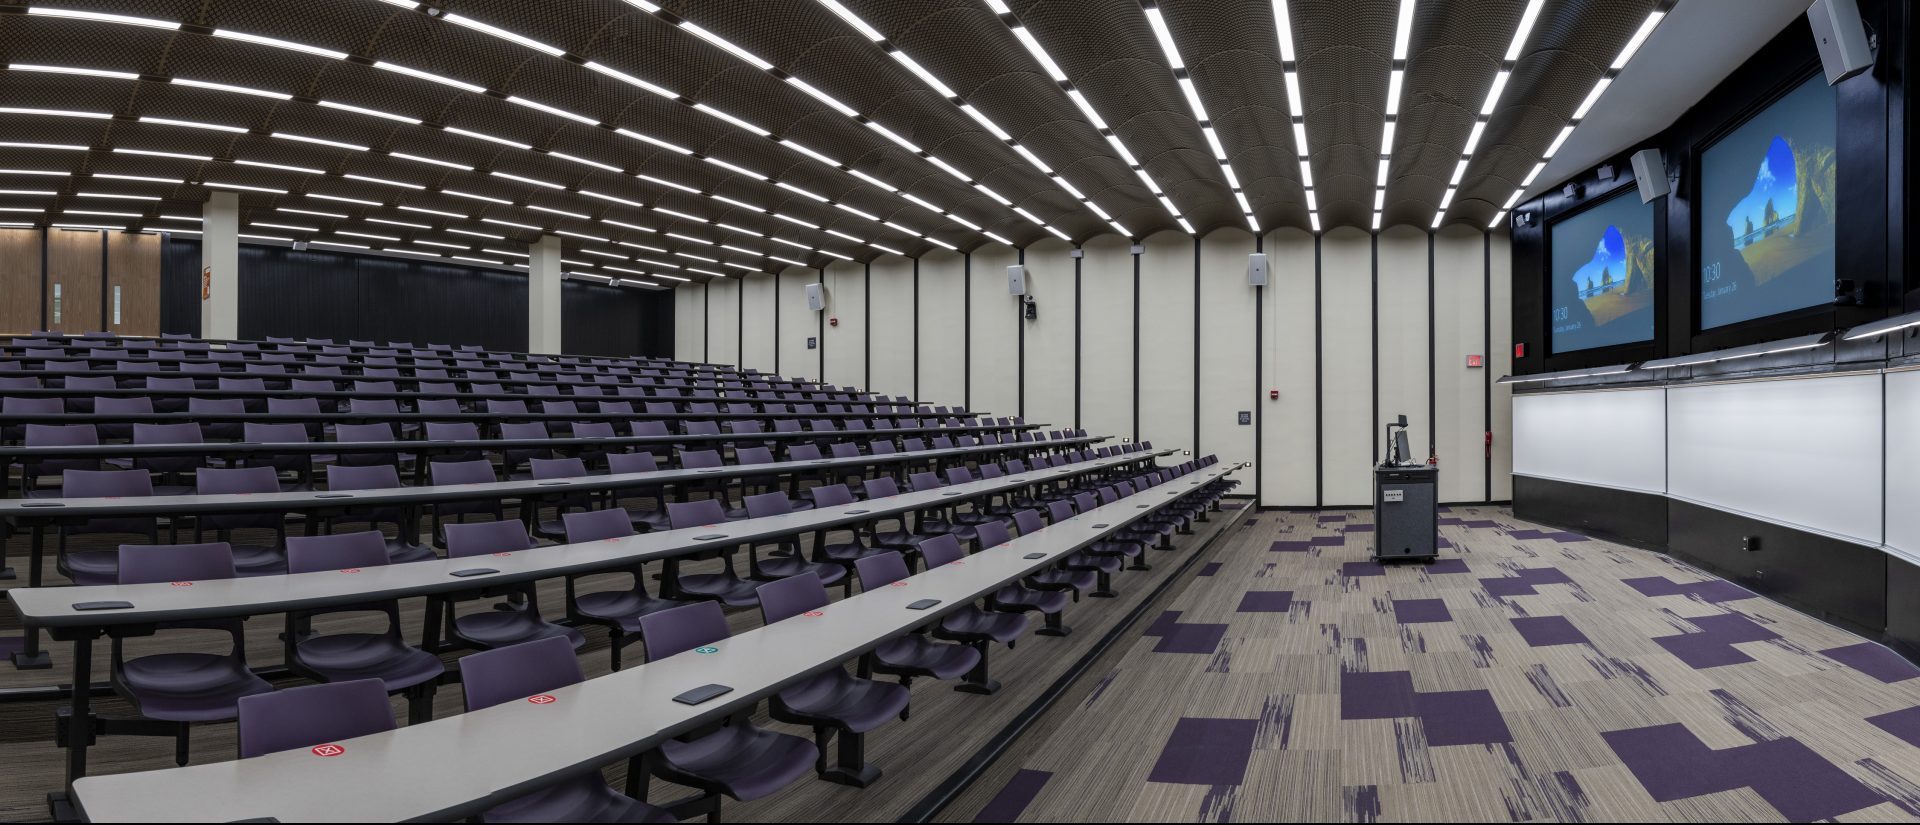 UAlbany Lecture Center lecture hall panoramic view